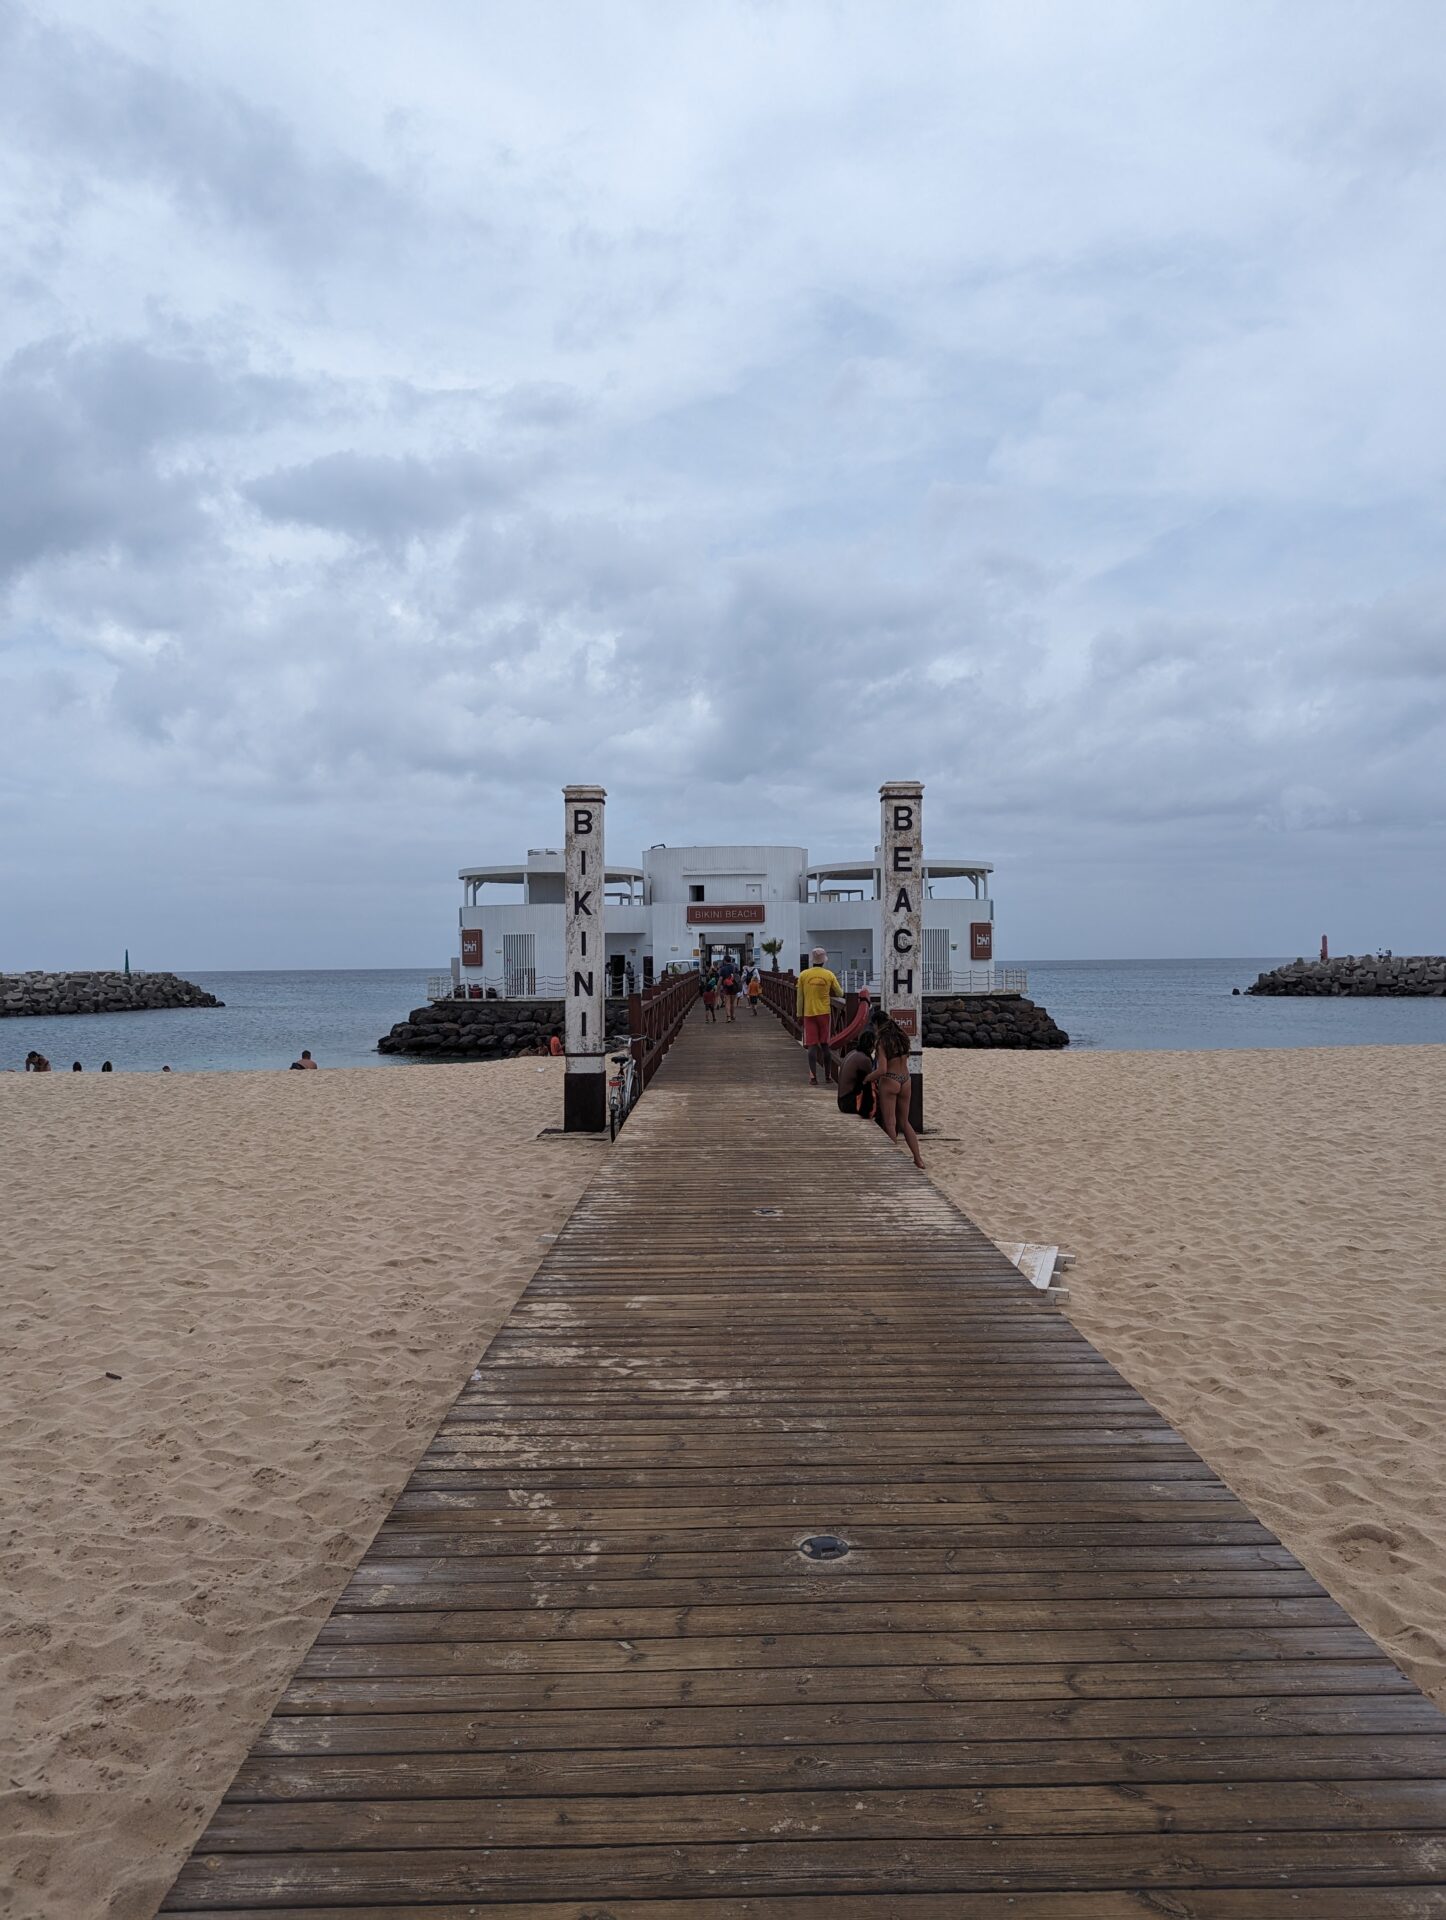 a wooden walkway leading to a beach